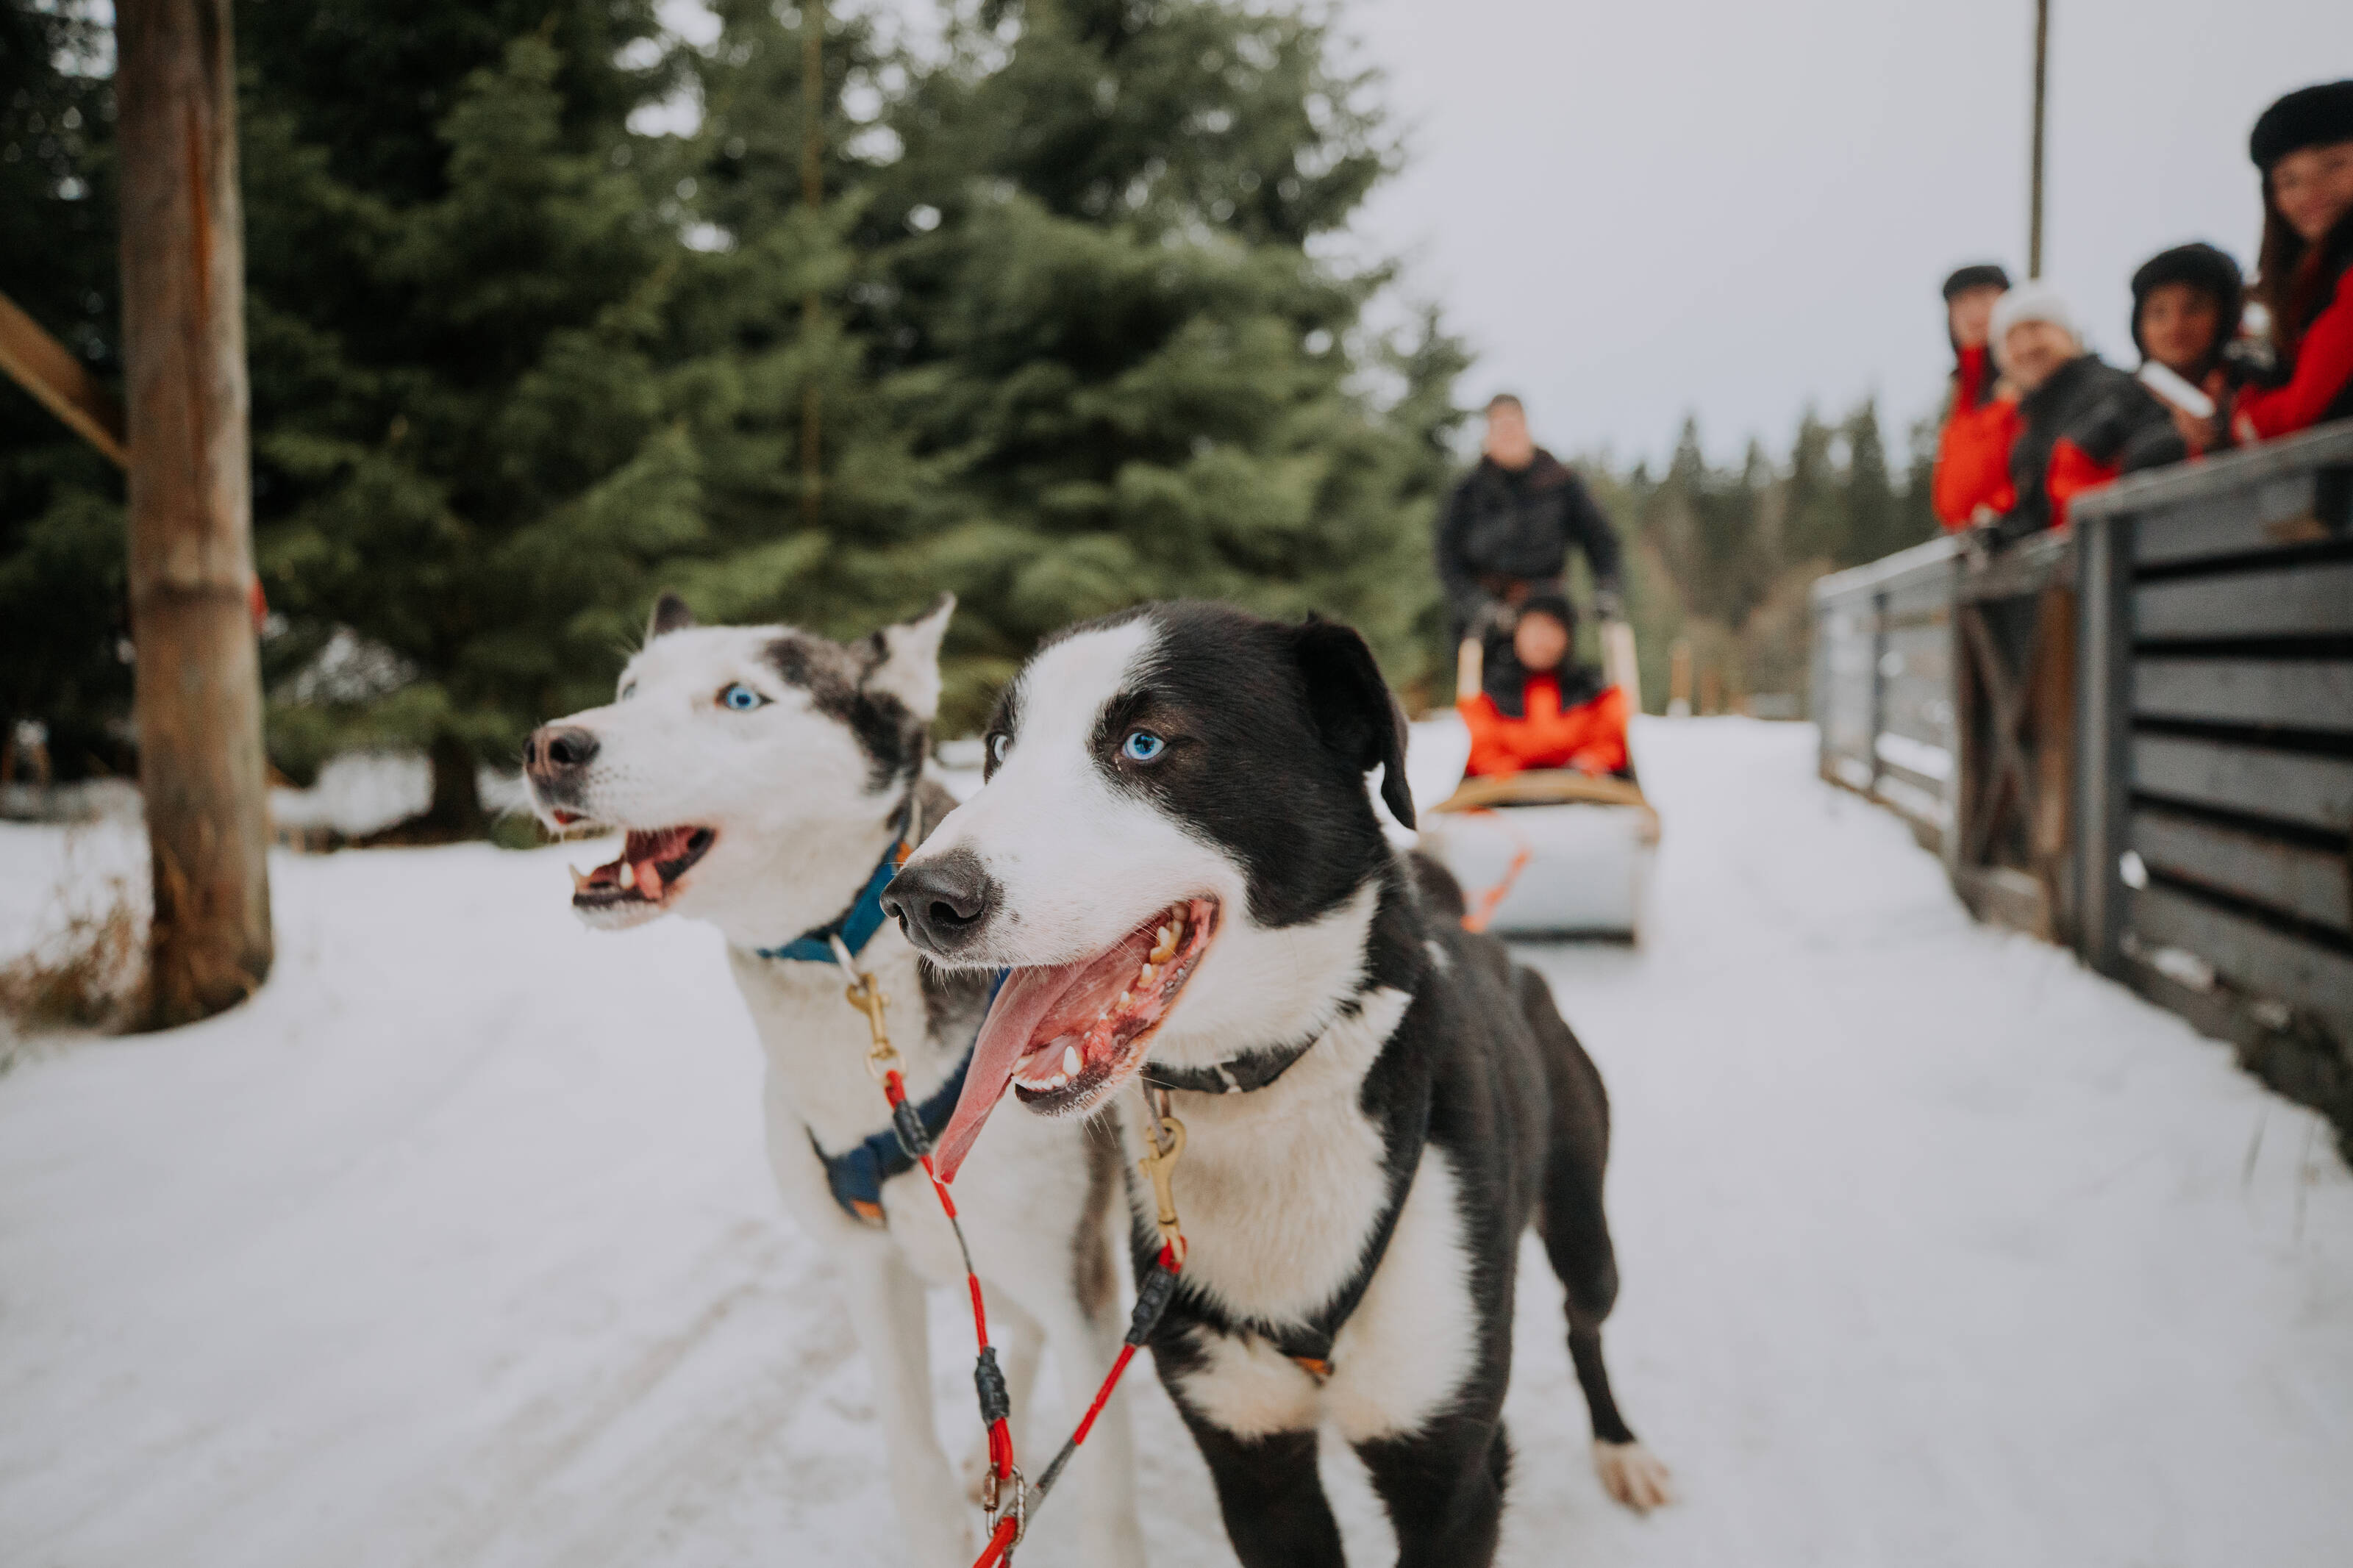 Two blue-eyed huskies stare off to the left as they pull two people in a sled on a snowy trail. A crowd of onlookers watches from behind a fence in the right side of the frame.